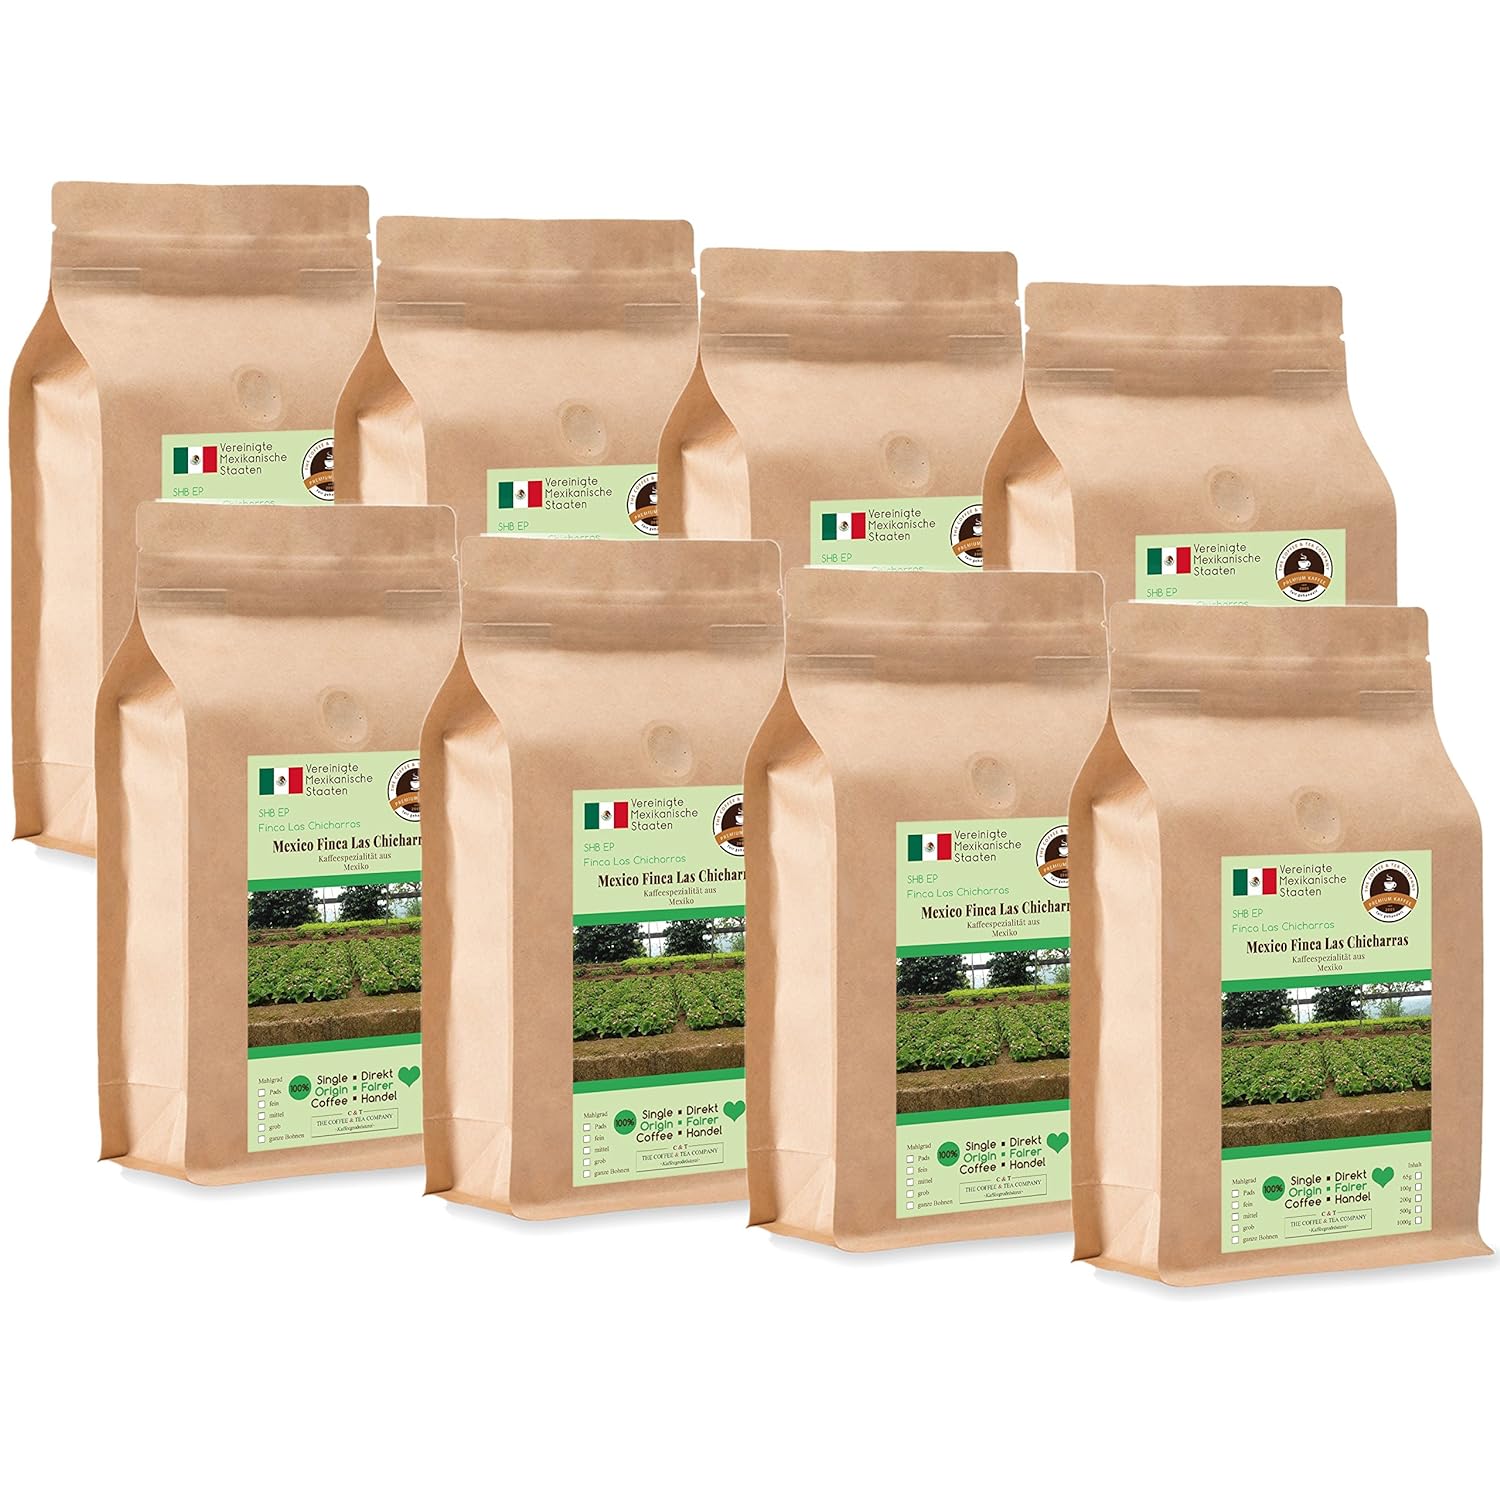 Coffee Globetrotter - Coffee with Heart - Mexico Finca Las Chicharras - 8 x 1000 g Coarse Ground - for Fully Automatic Coffee Grinder - Roasted Coffee Fair Trade | Gastropack Economy Pack